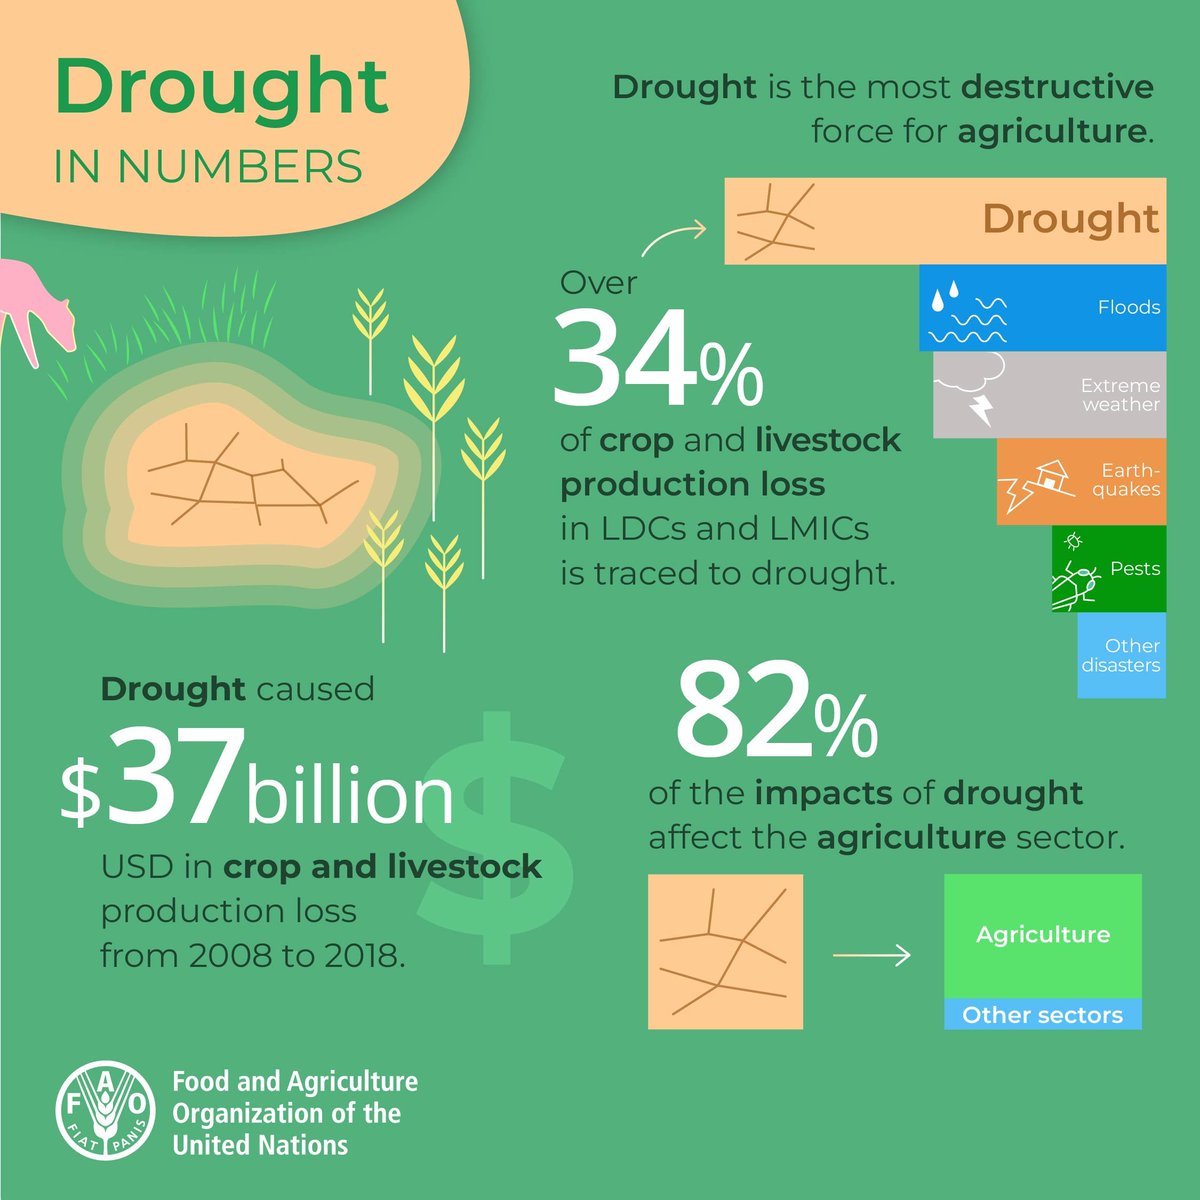 In least developed and low to middle income countries, #drought remains the primary cause of agricultural production loss, affecting agriculture almost exclusively. Learn more👉bit.ly/3Bny3c5 @FAO